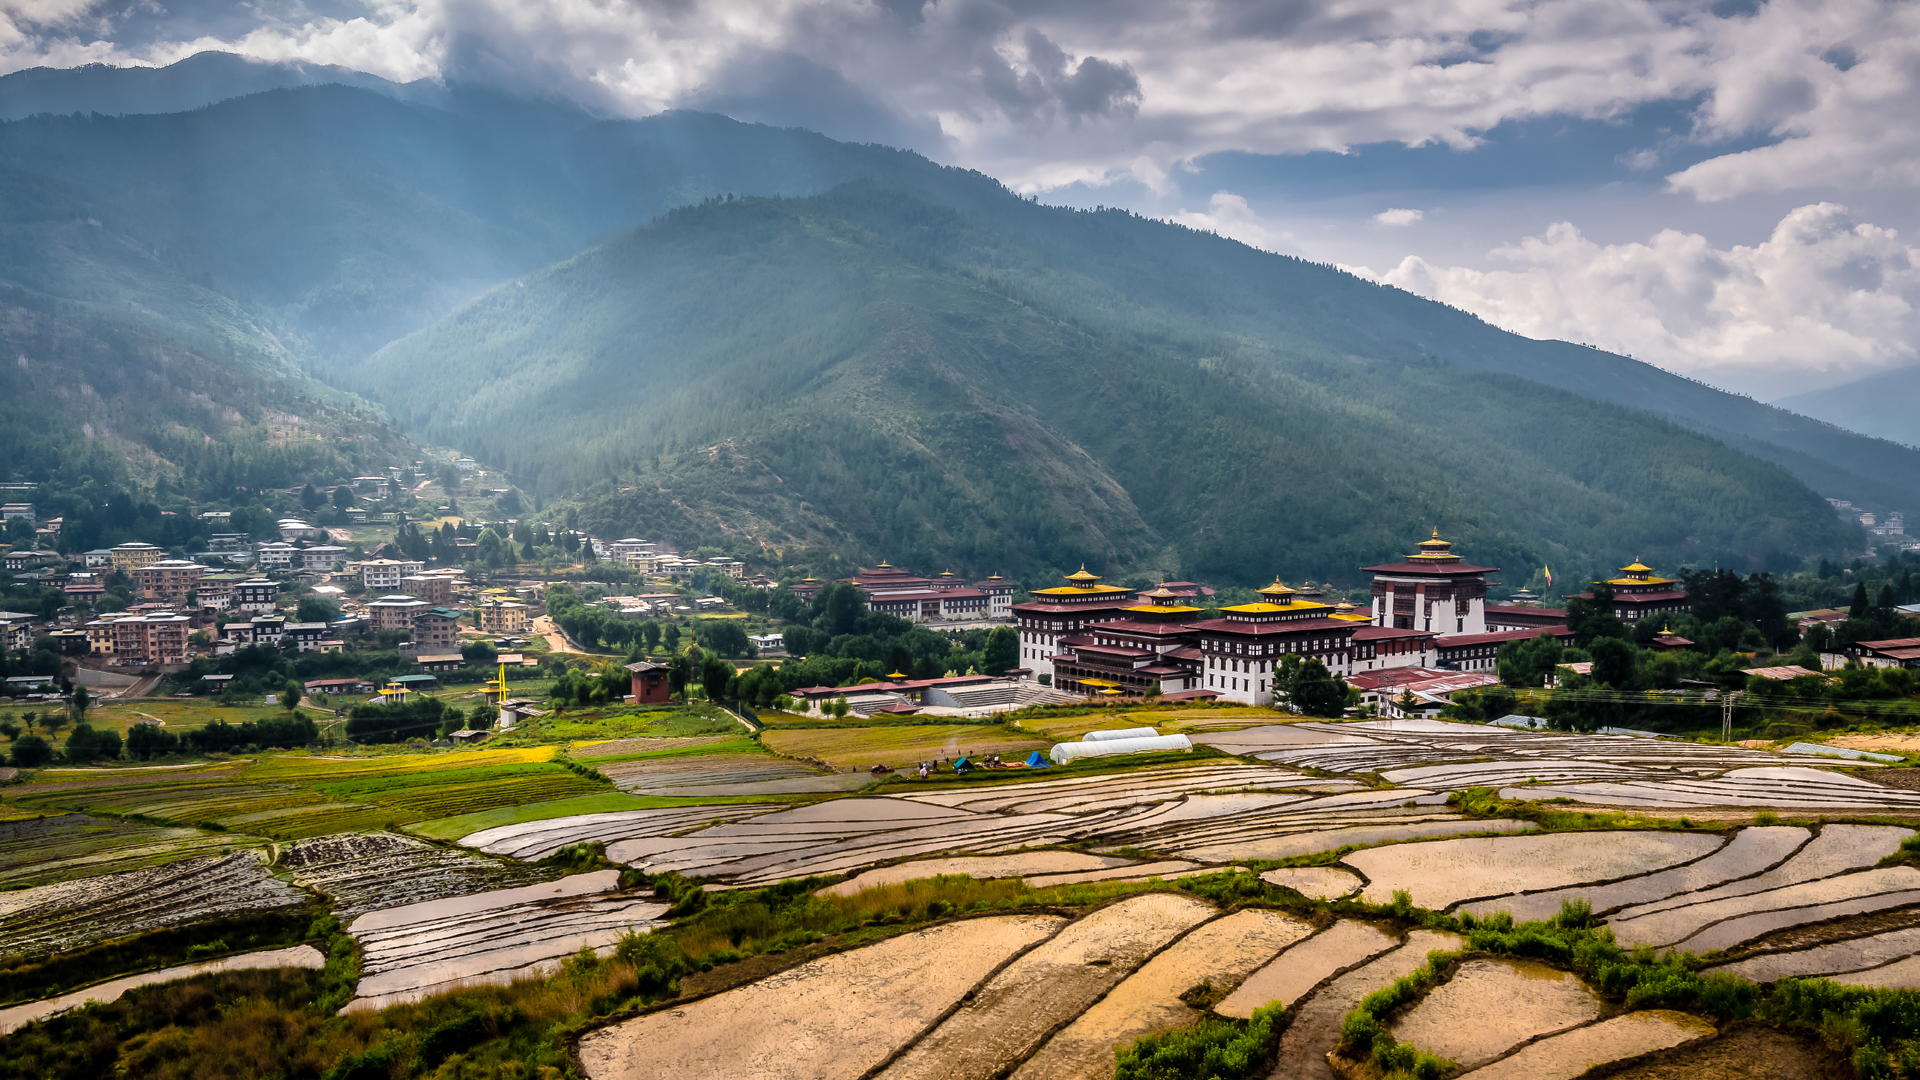 Arrival and Transfer to Thimphu Valley. Overnight at Thimpu'